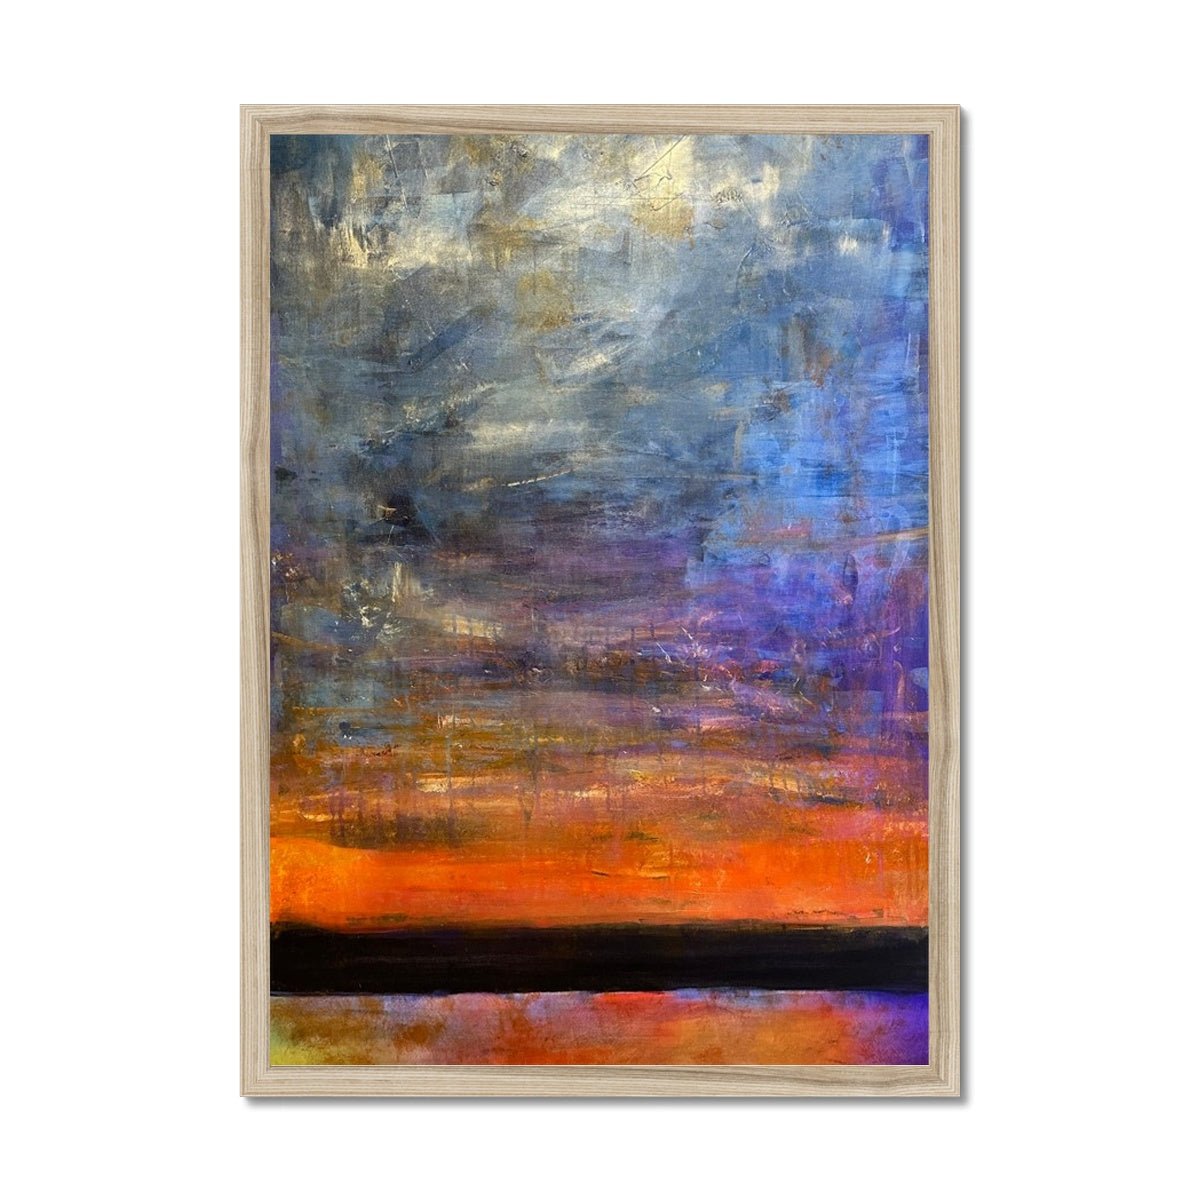 Horizon Dreams Abstract Painting | Framed Prints From Scotland-Framed Prints-Abstract & Impressionistic Art Gallery-A2 Portrait-Natural Frame-Paintings, Prints, Homeware, Art Gifts From Scotland By Scottish Artist Kevin Hunter